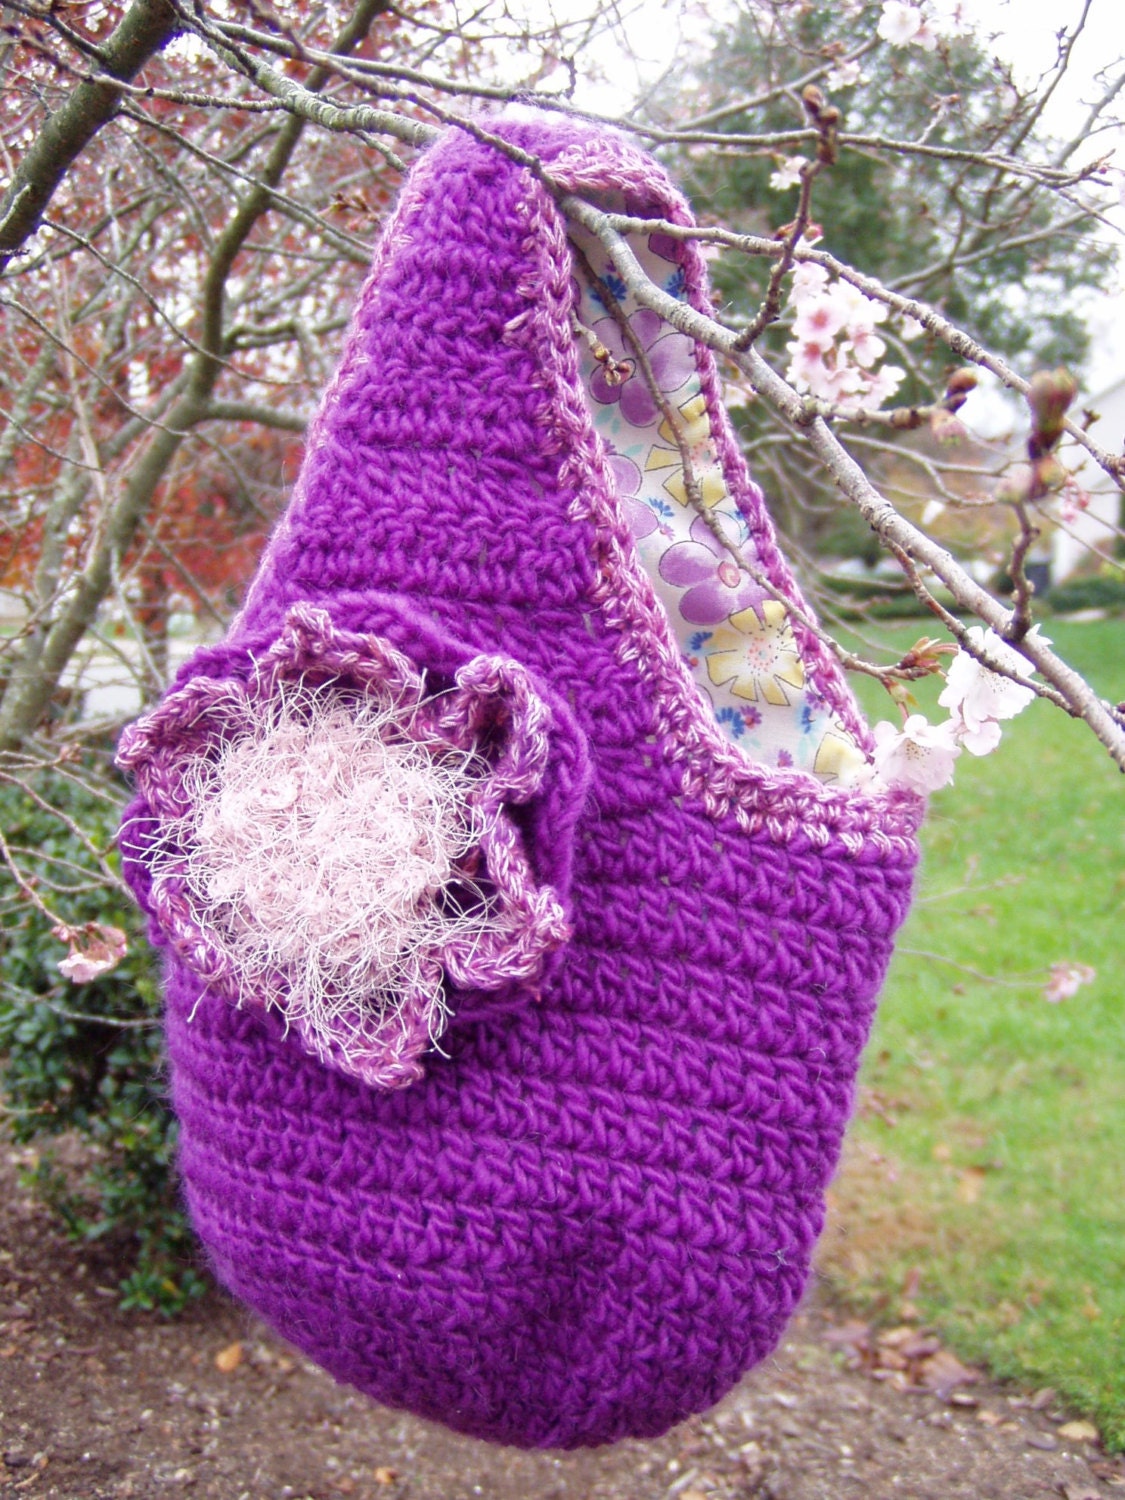 Everything-But-The-Kitchen-Sink Bag. Crochet by KnitterlyArts